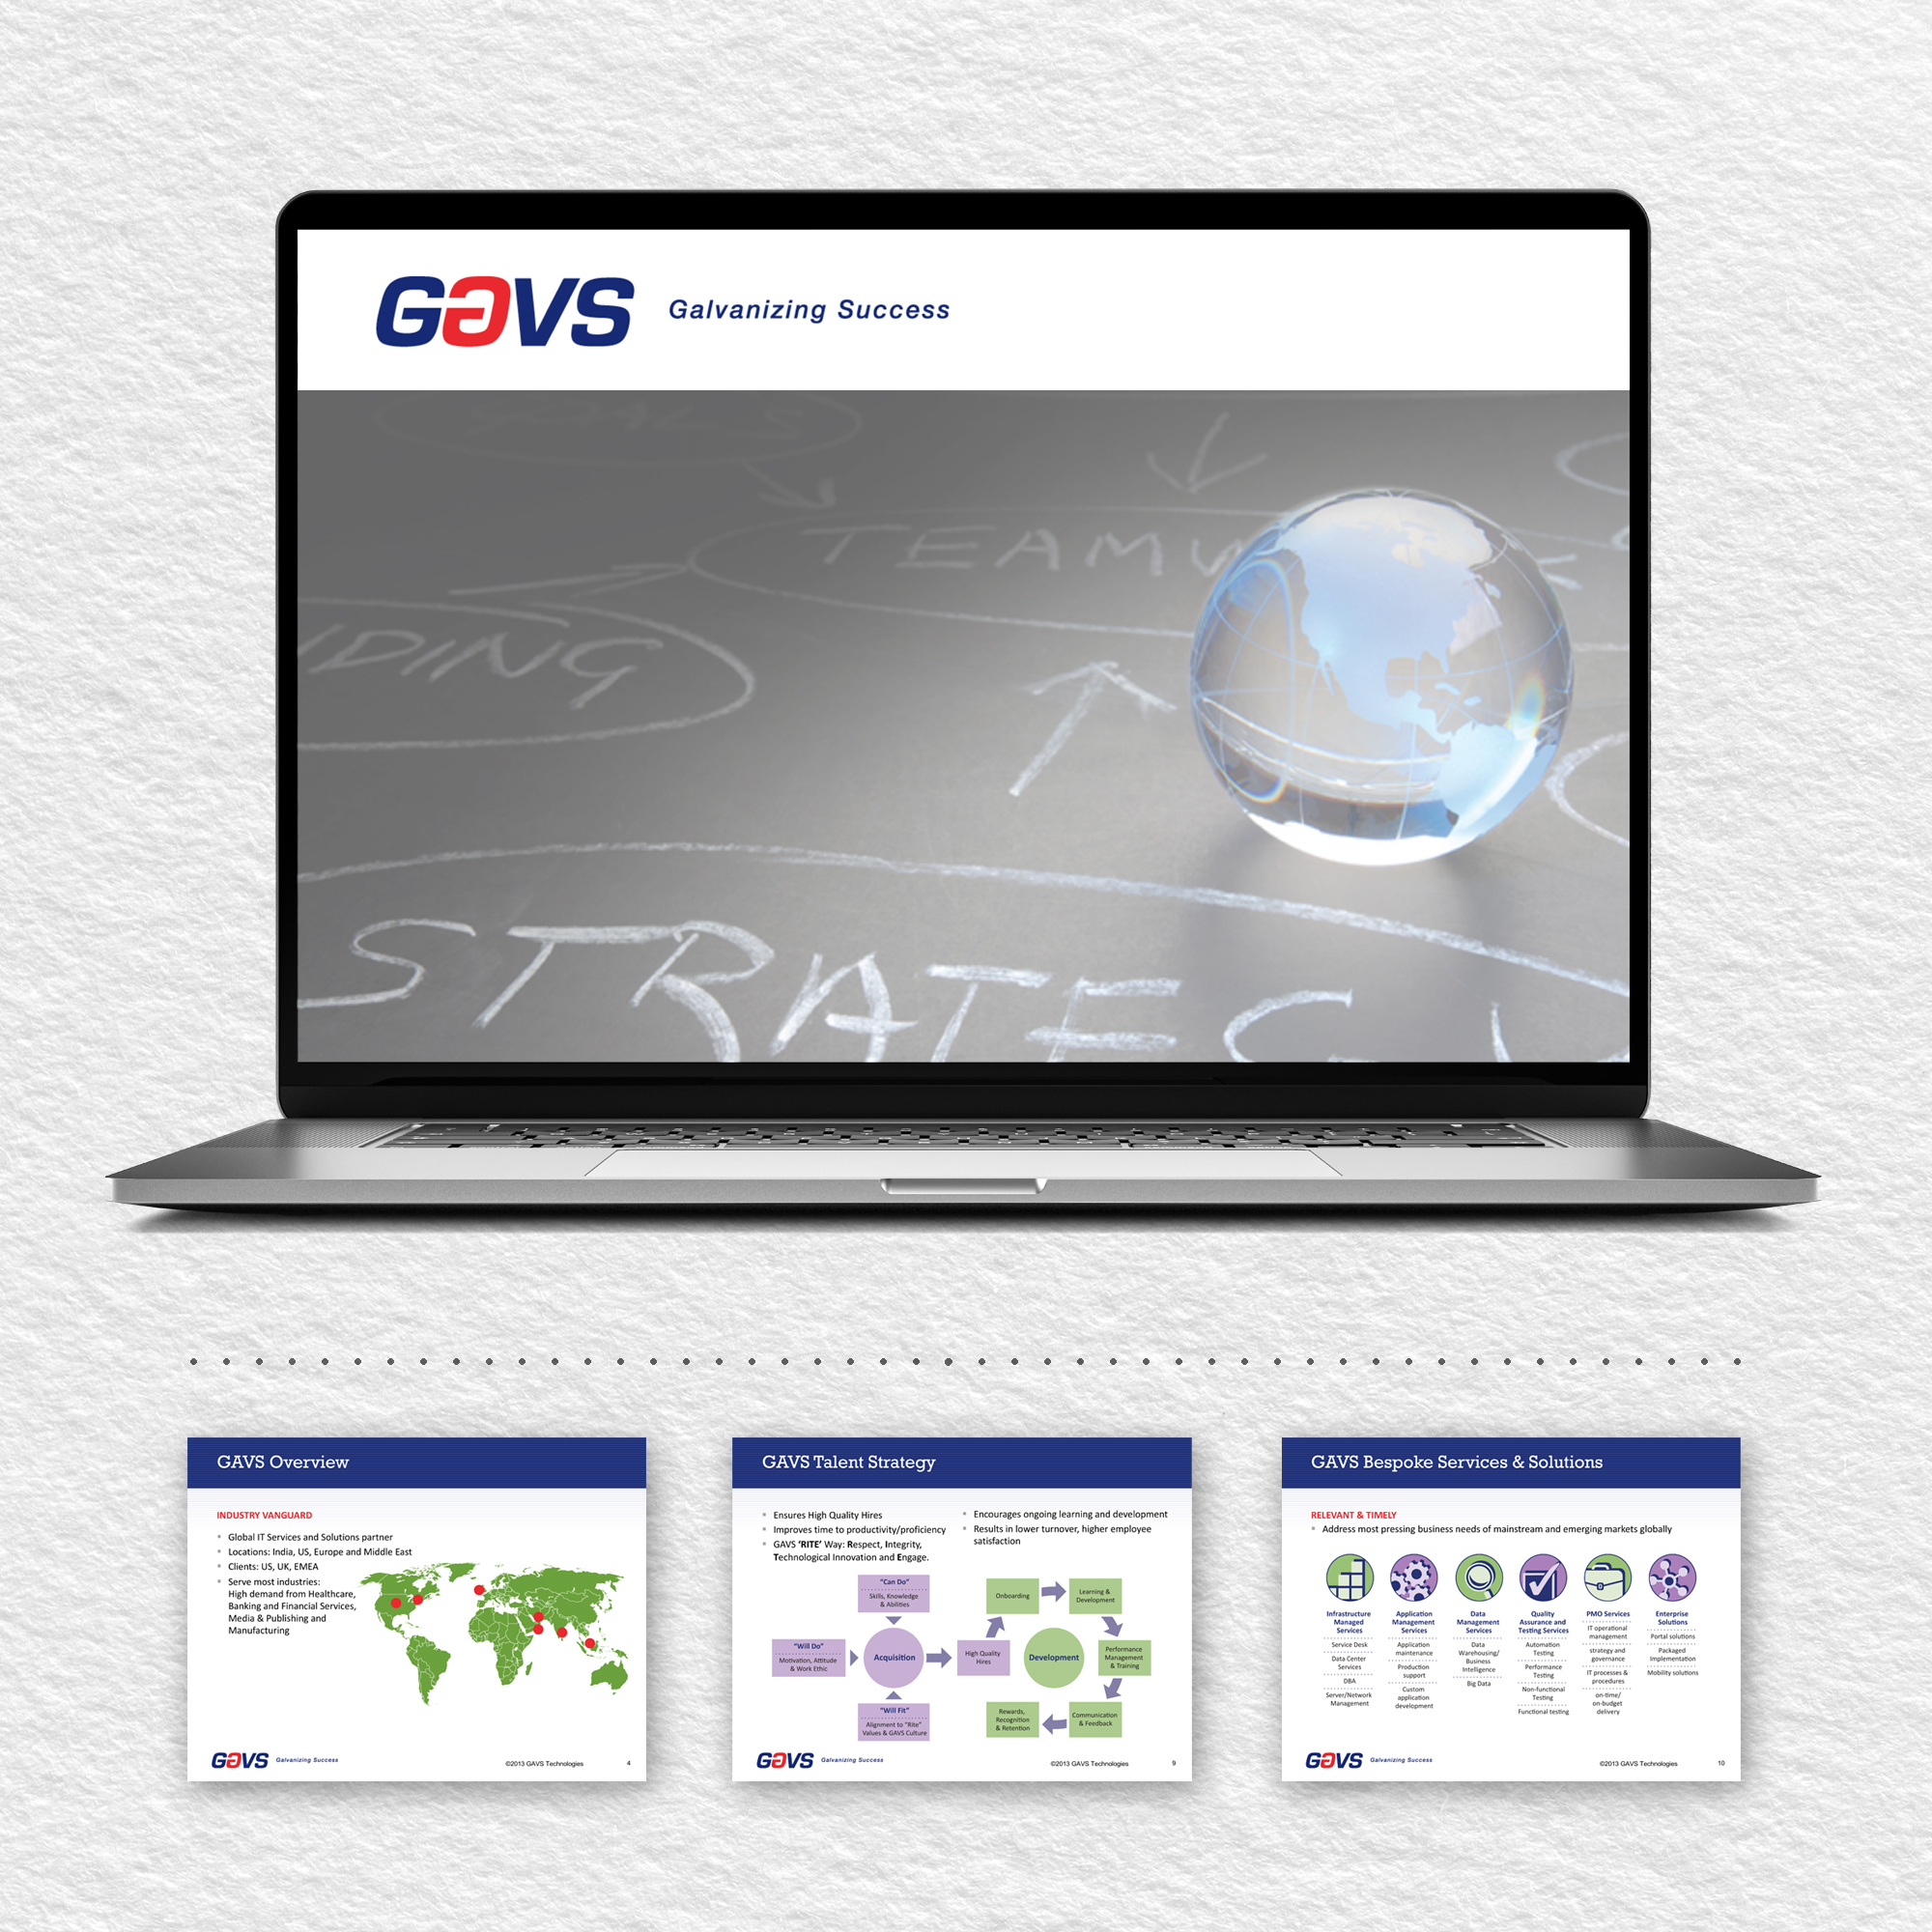 GAVS success story. Marketing Communications example of Powerpoint presentation